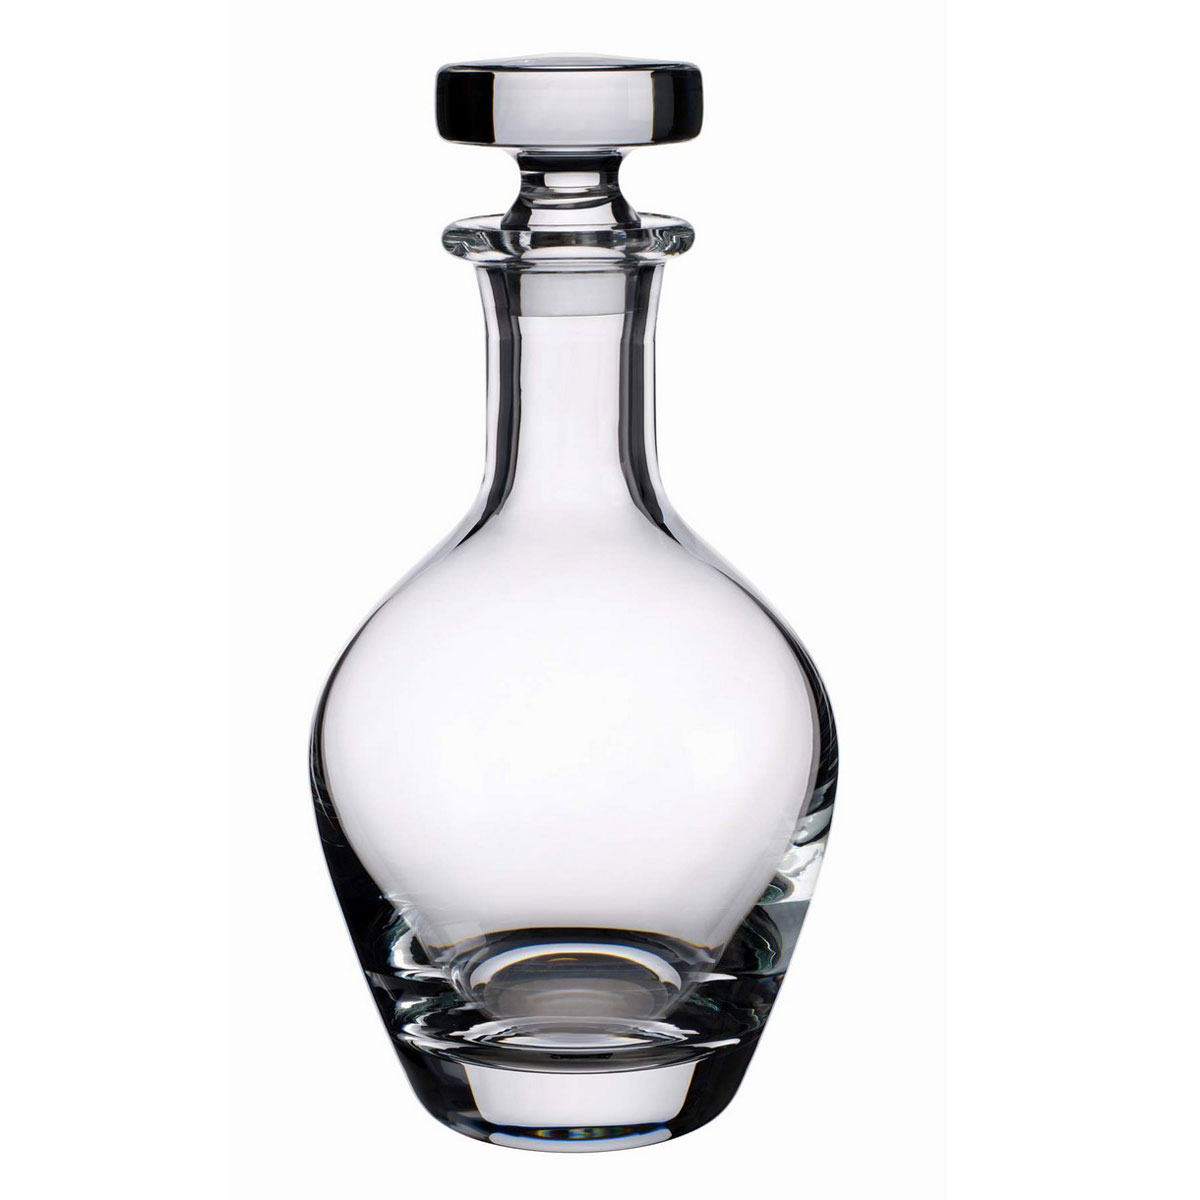 Villeroy and Boch American Bar Scotch Whisky Carafe No. 1 Full Body, Delicate